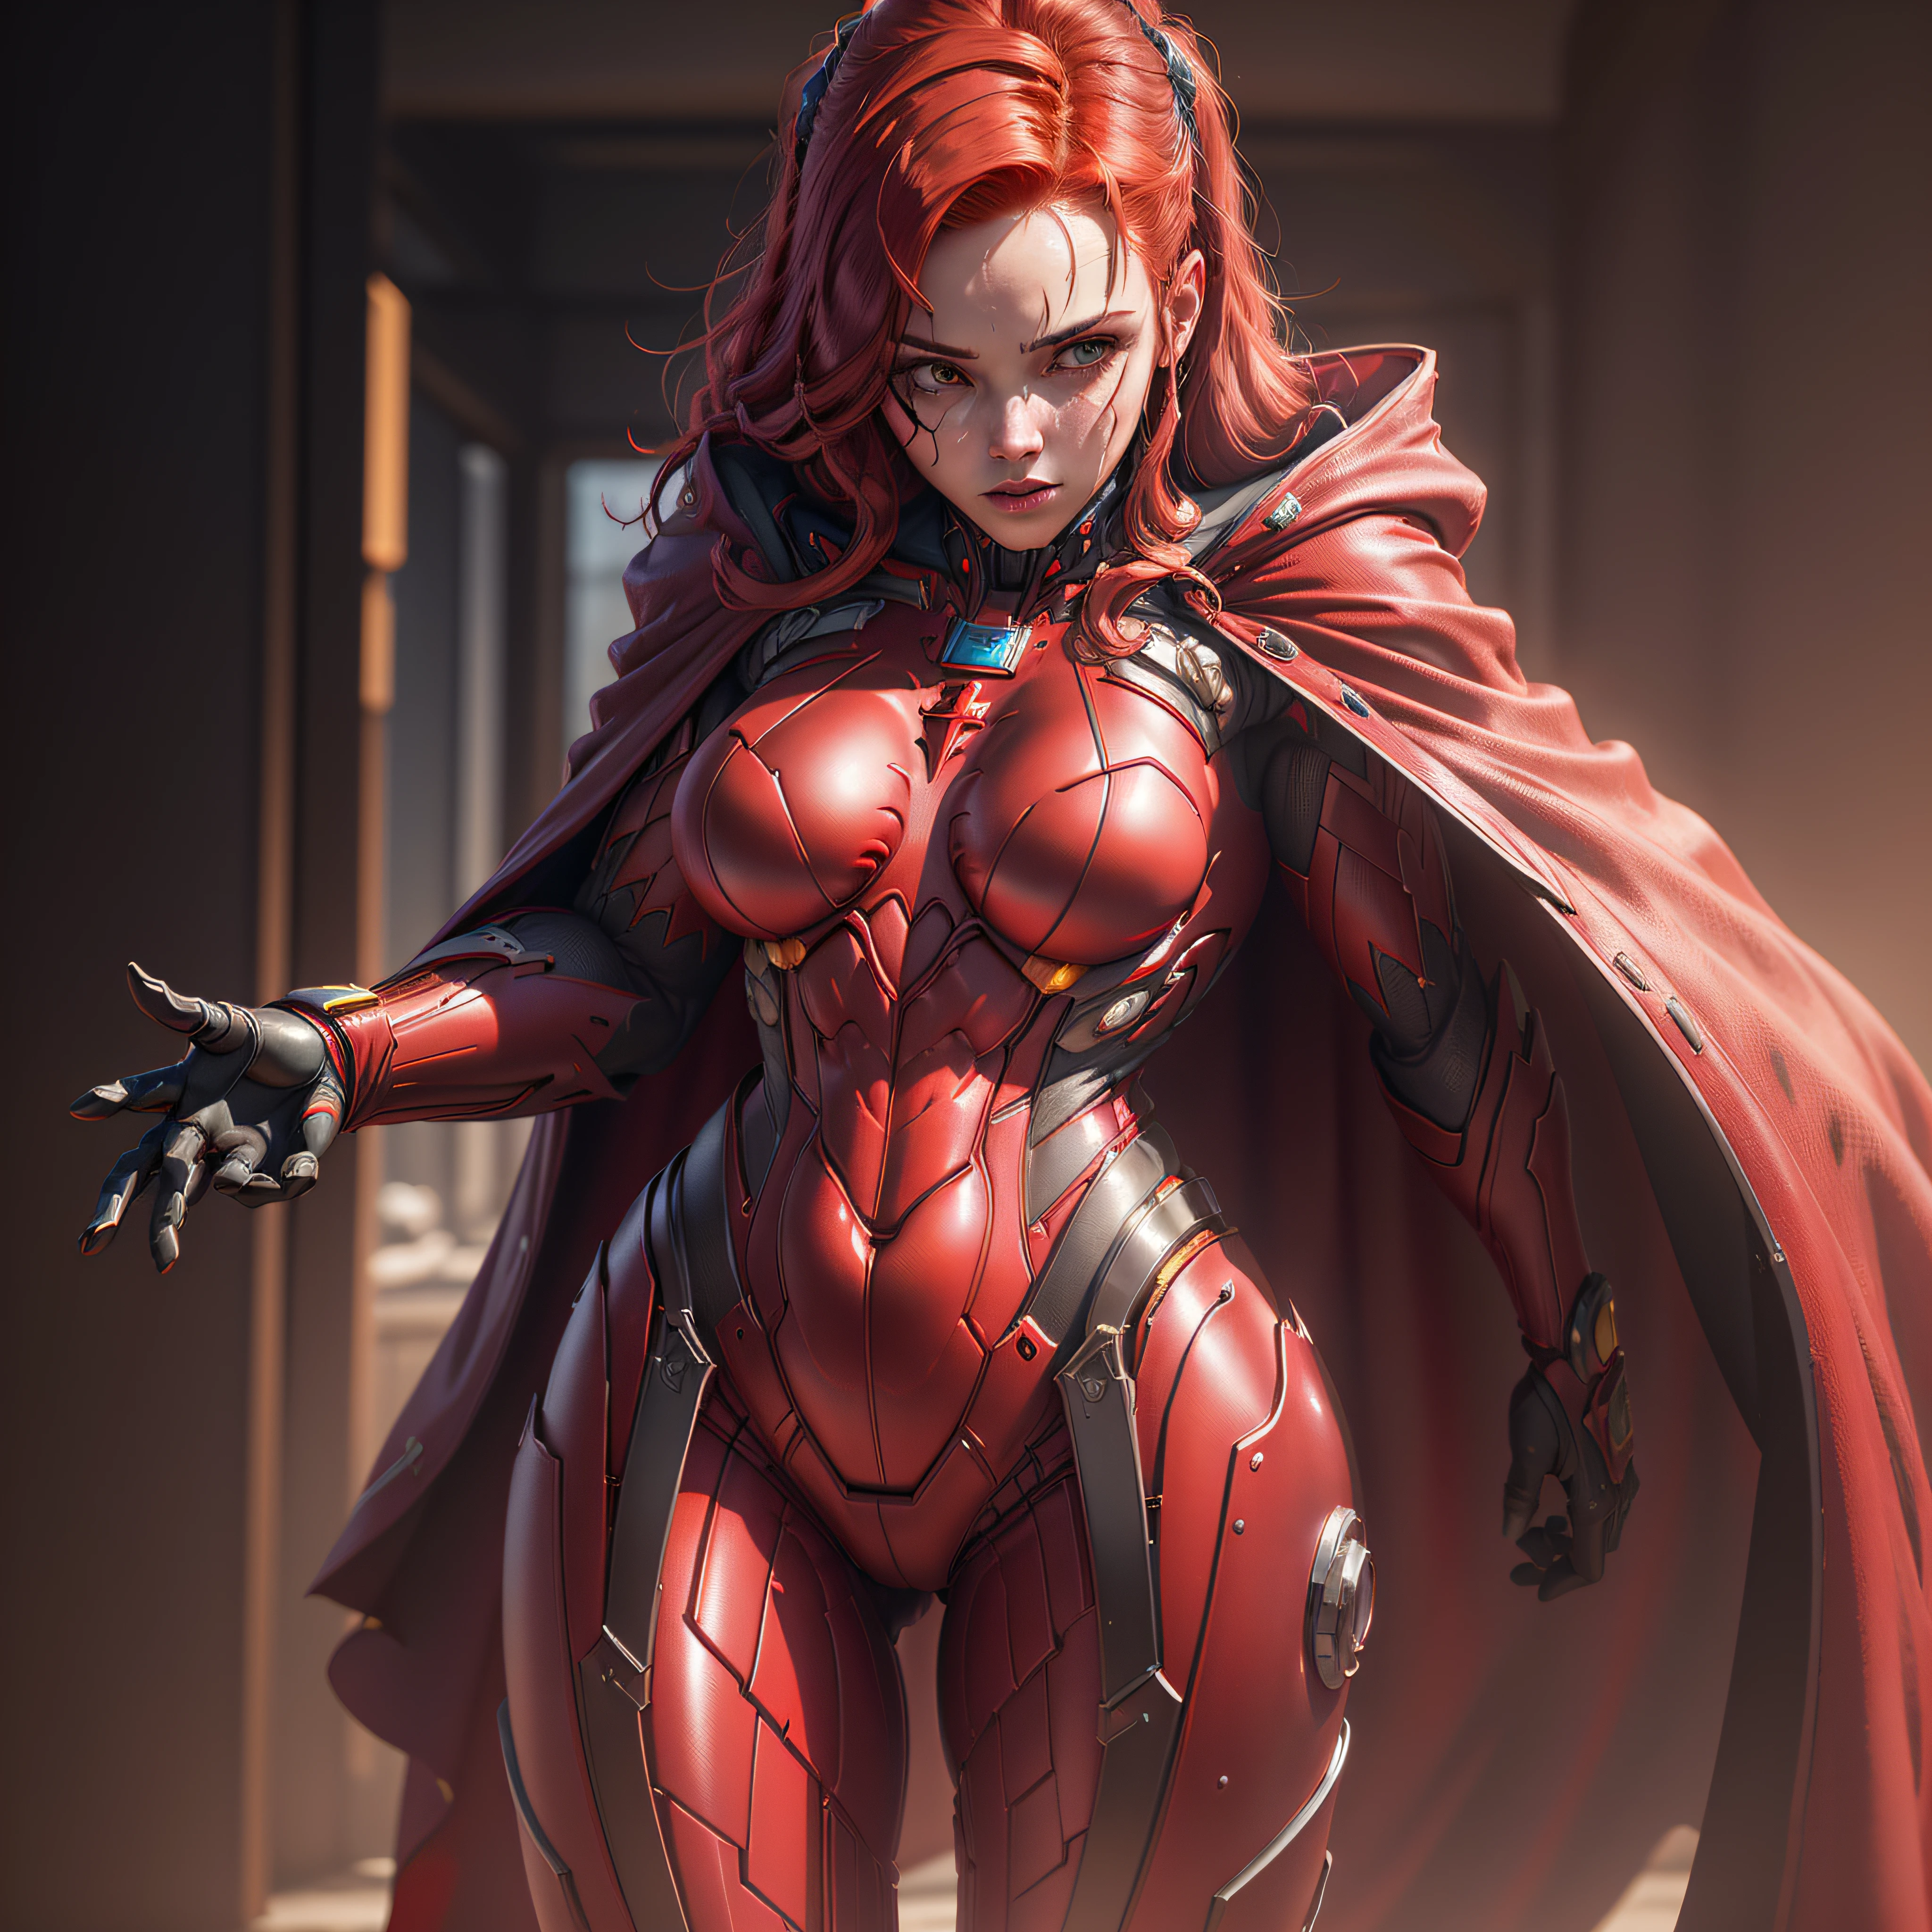 ((Best quality)), ((masterpiece)), (detailed:1.4), 3D, an image of a beautiful Red cyberpunk Scarlet Witch, (((Red hair)))HDR (High Dynamic Range),Ray Tracing,NVIDIA RTX,Super-Resolution,Unreal 5,Subsurface scattering,PBR Texturing,Post-processing,Anisotropic Filtering,Depth-of-field,Maximum clarity and sharpness,Multi-layered textures,Albedo and Specular maps,Surface shading,Accurate simulation of light-material interaction,Perfect proportions,Octane Render,Two-tone lighting,Wide aperture,Low ISO,White balance,Rule of thirds,8K RAW, (((Red crysisnanosuit))) with (((red cape)))